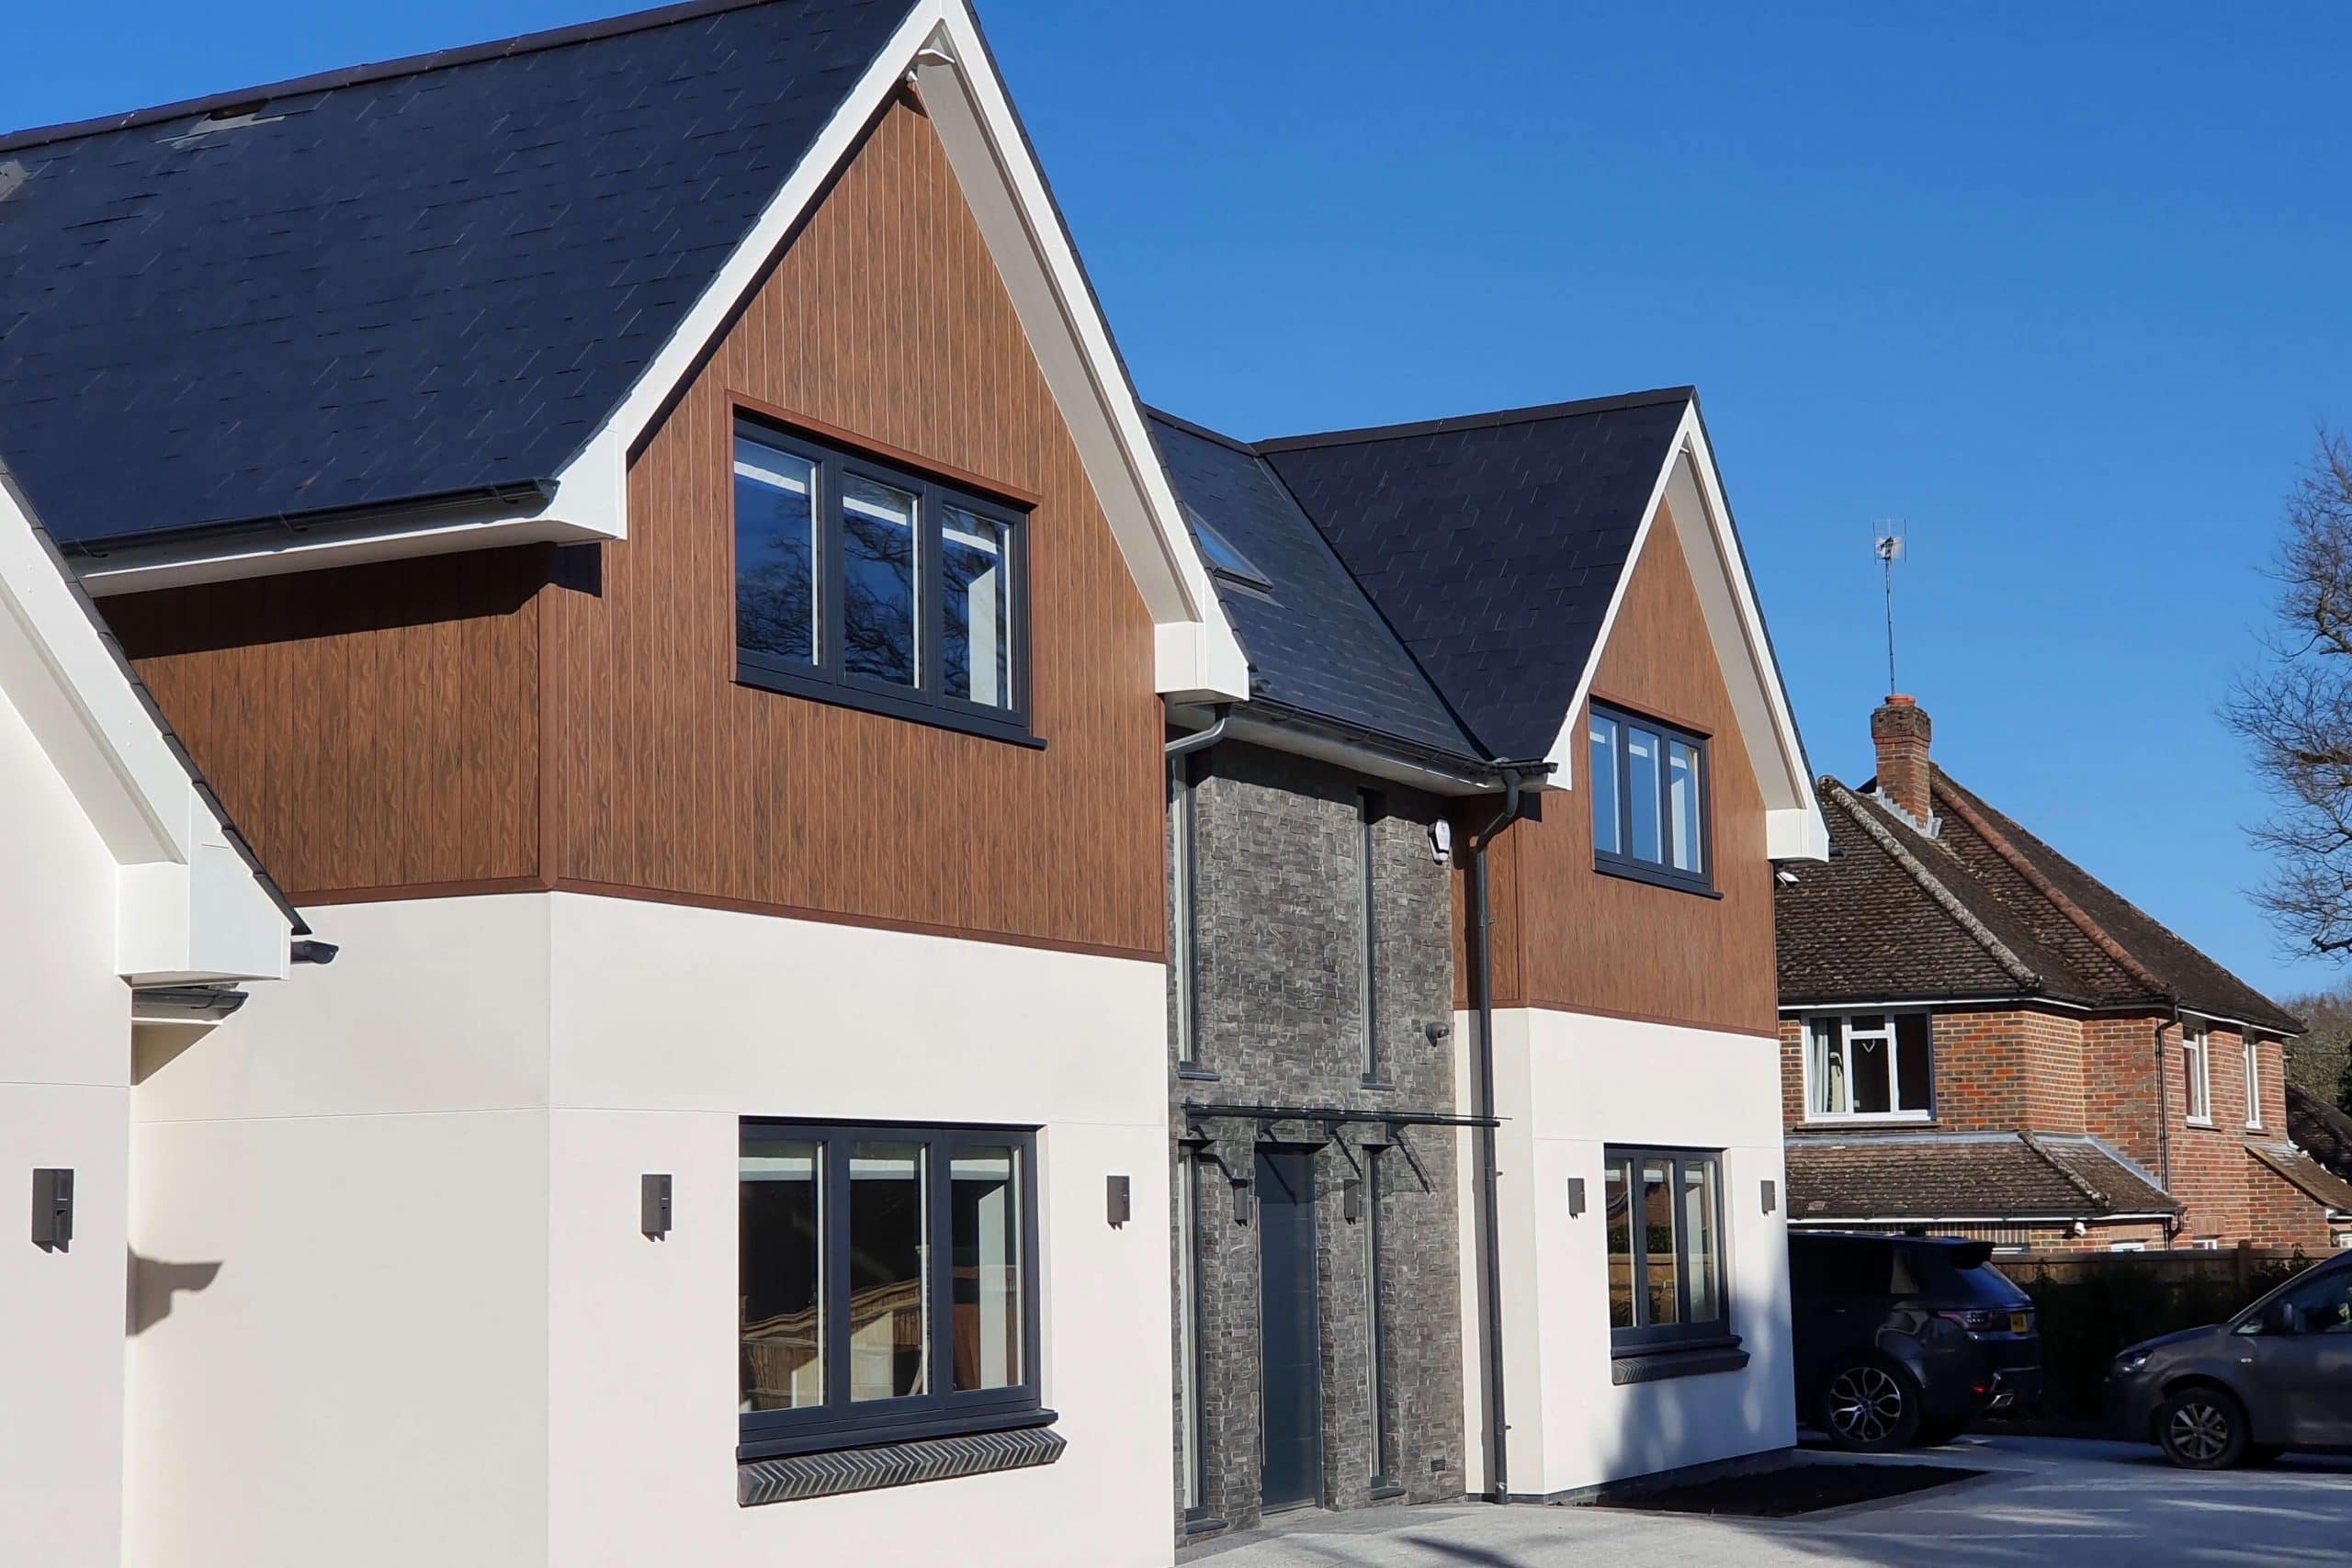 Exterior of Scandia Hus new build that Sub Cool FM undertook MVHR and air con full project for - timber frame house